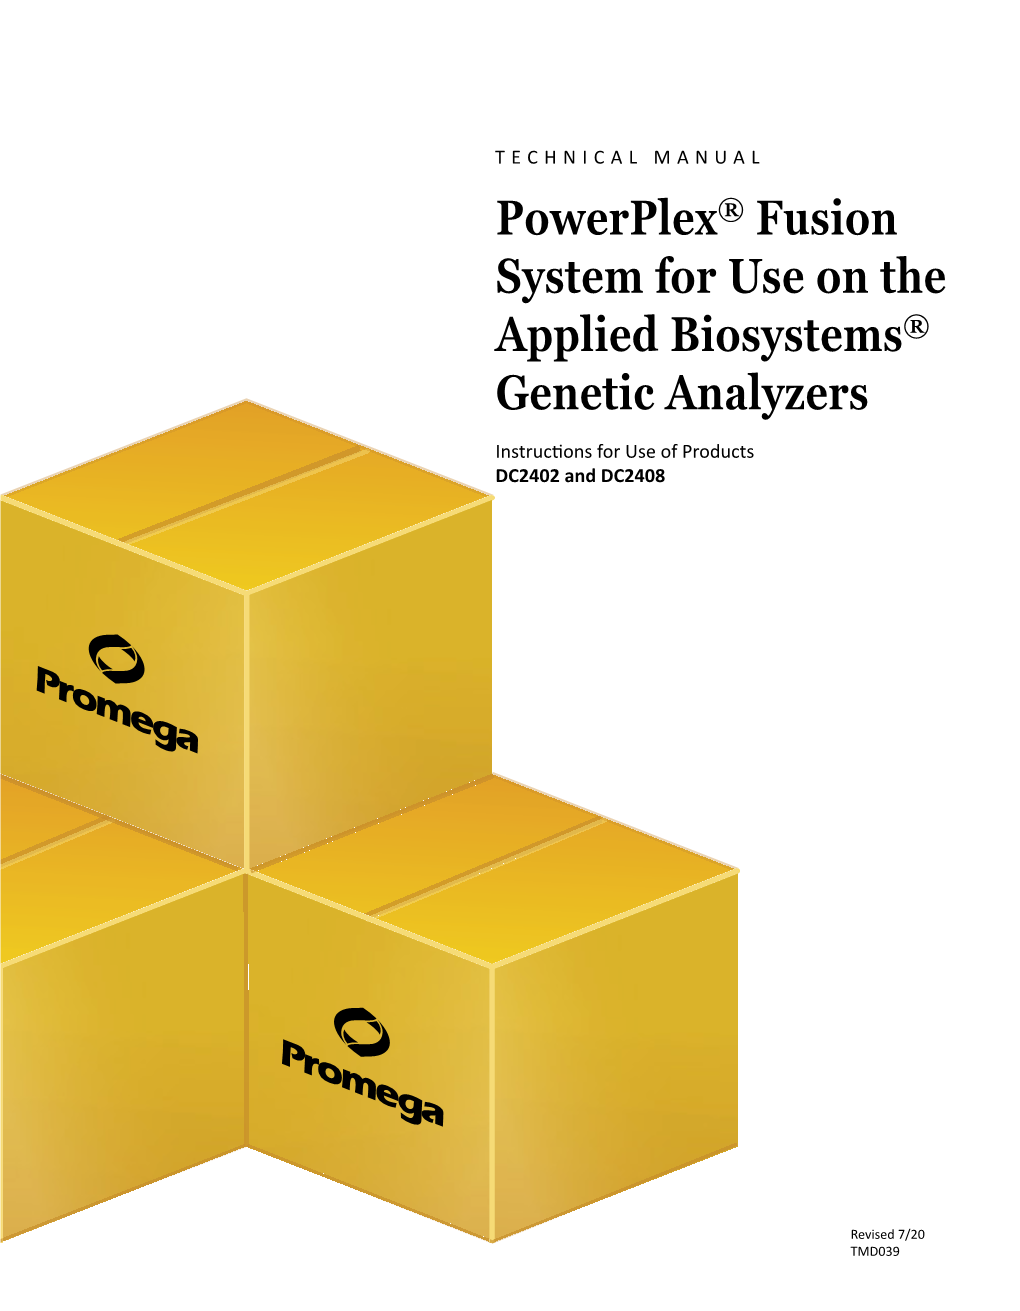 Powerplex® Fusion System for Use on the Applied Biosystems® Genetic Analyzers Technical Manual #TMD039